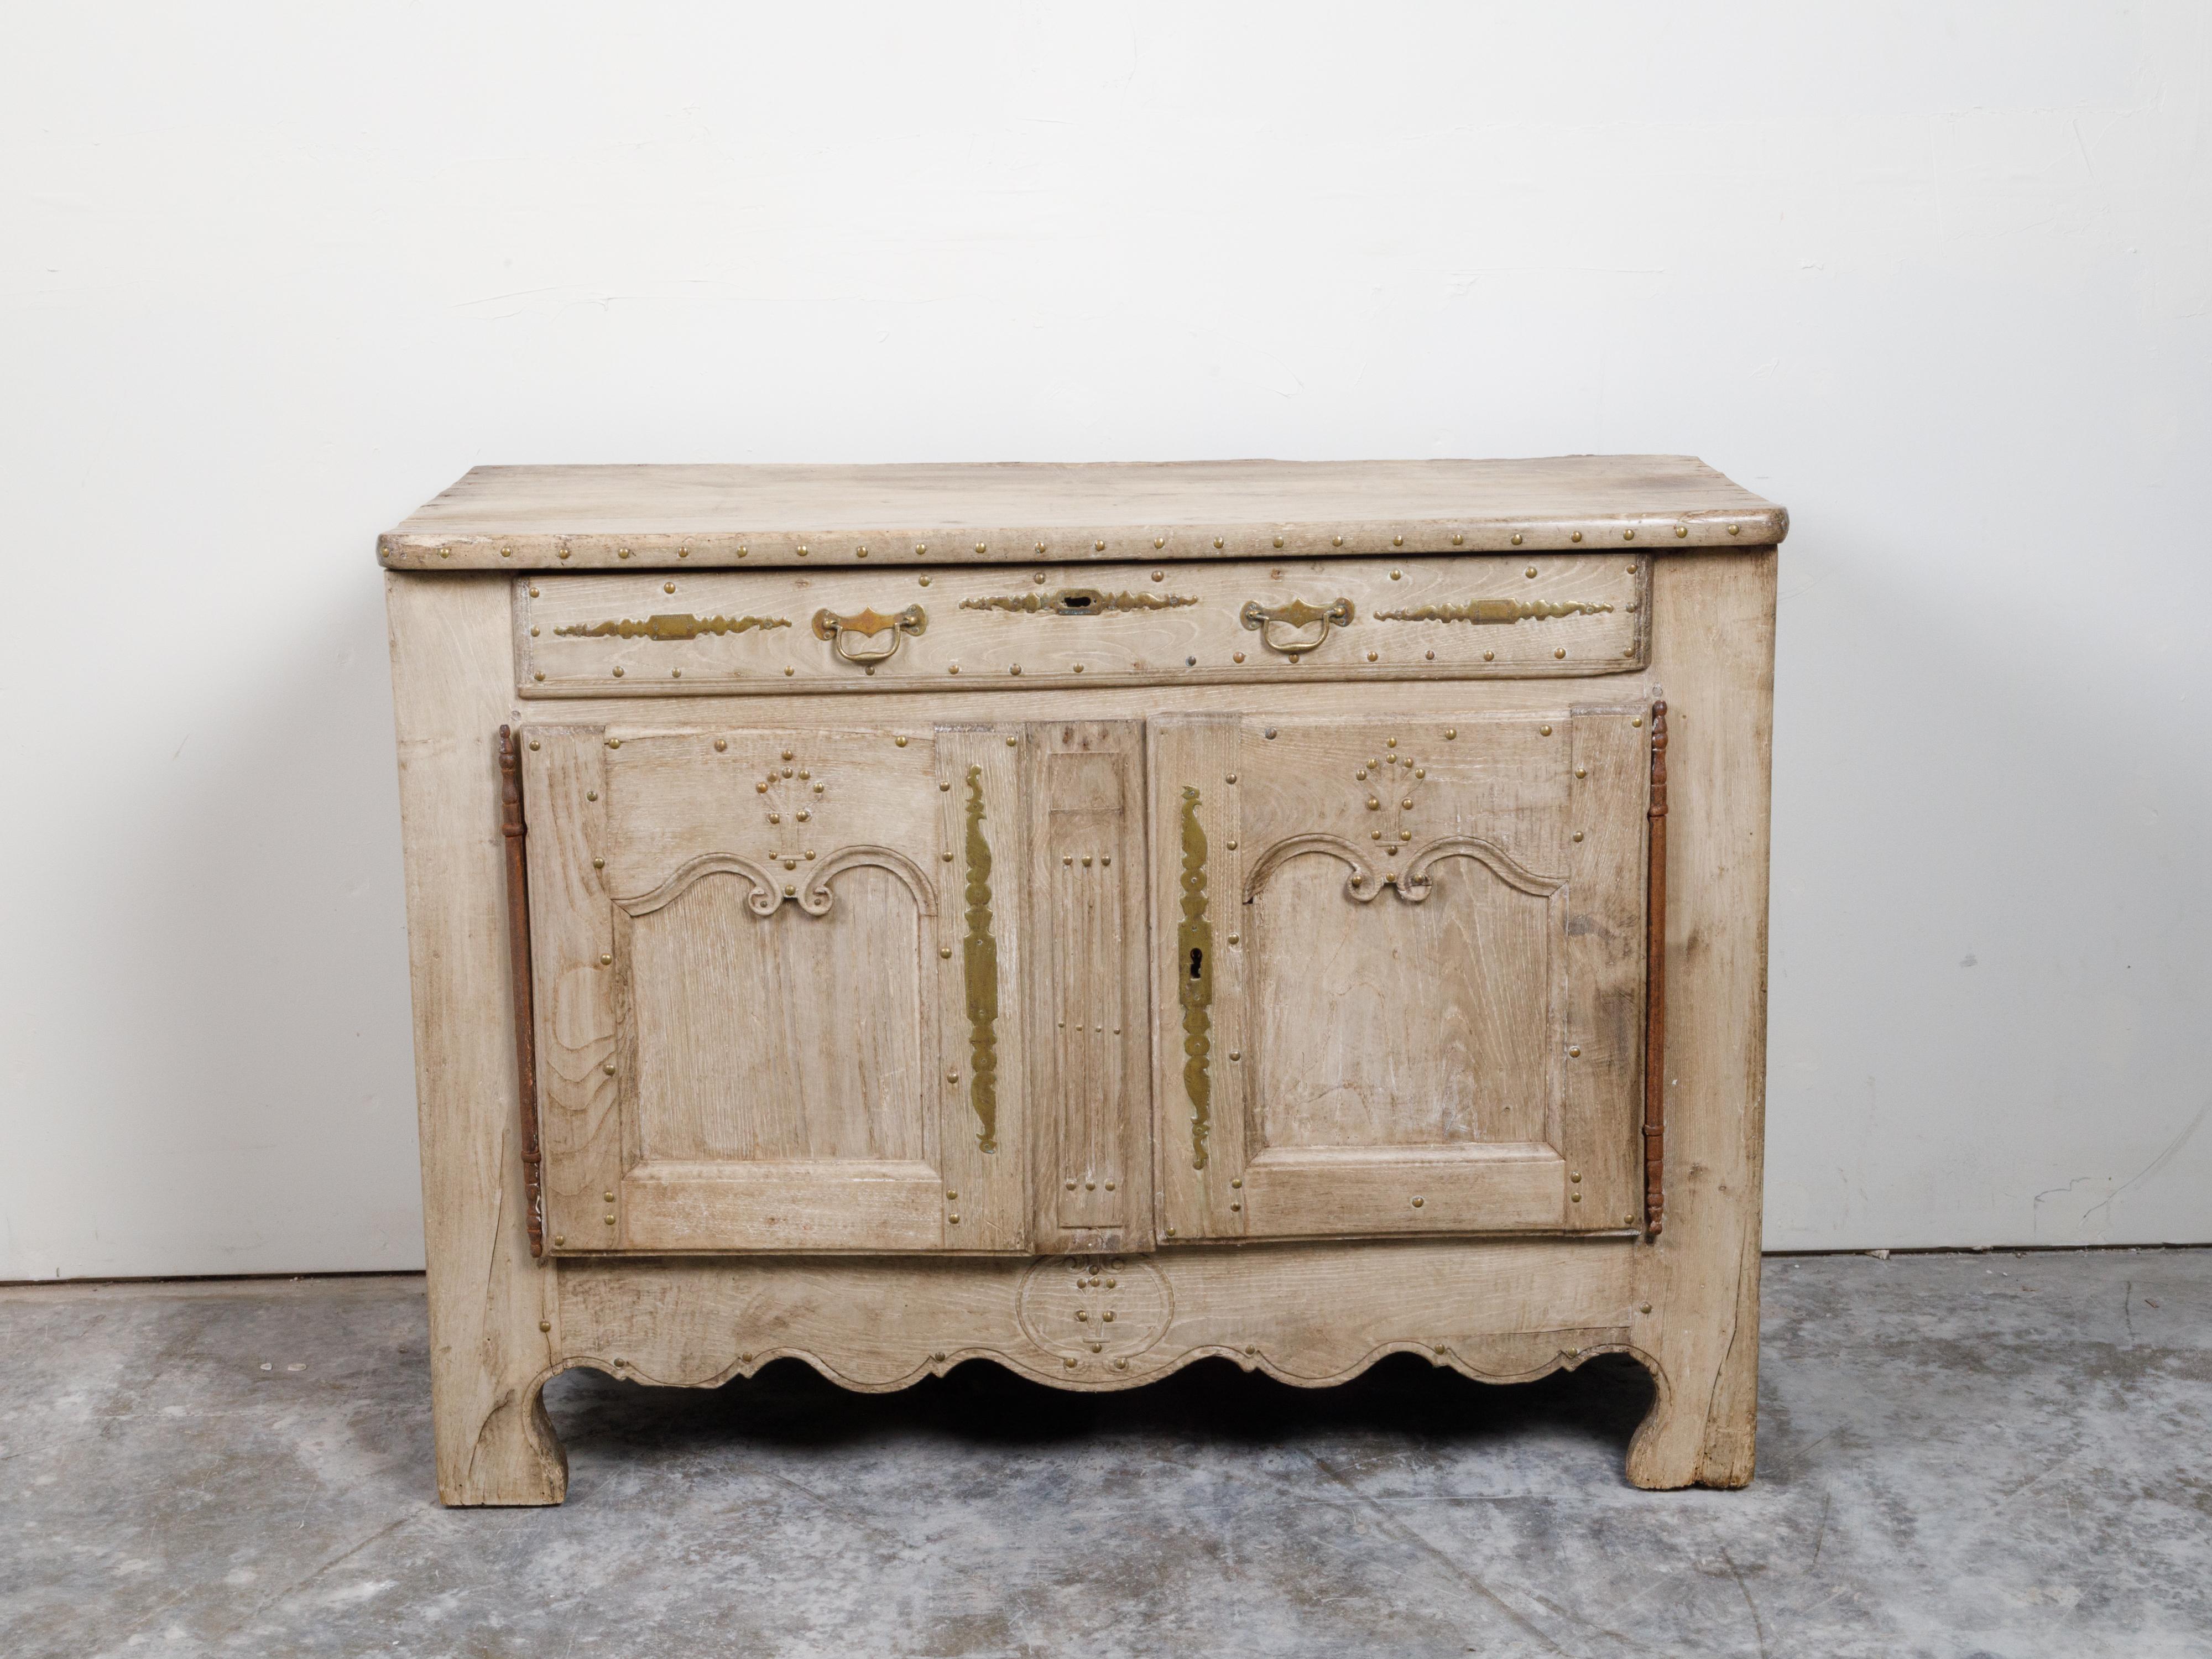 A French bleached wood buffet from the 19th century, with carved apron and nicely distressed patina. Created in France during the 19th century, this bleached wood buffet features a rectangular top with rounded corners and brass studs, sitting above